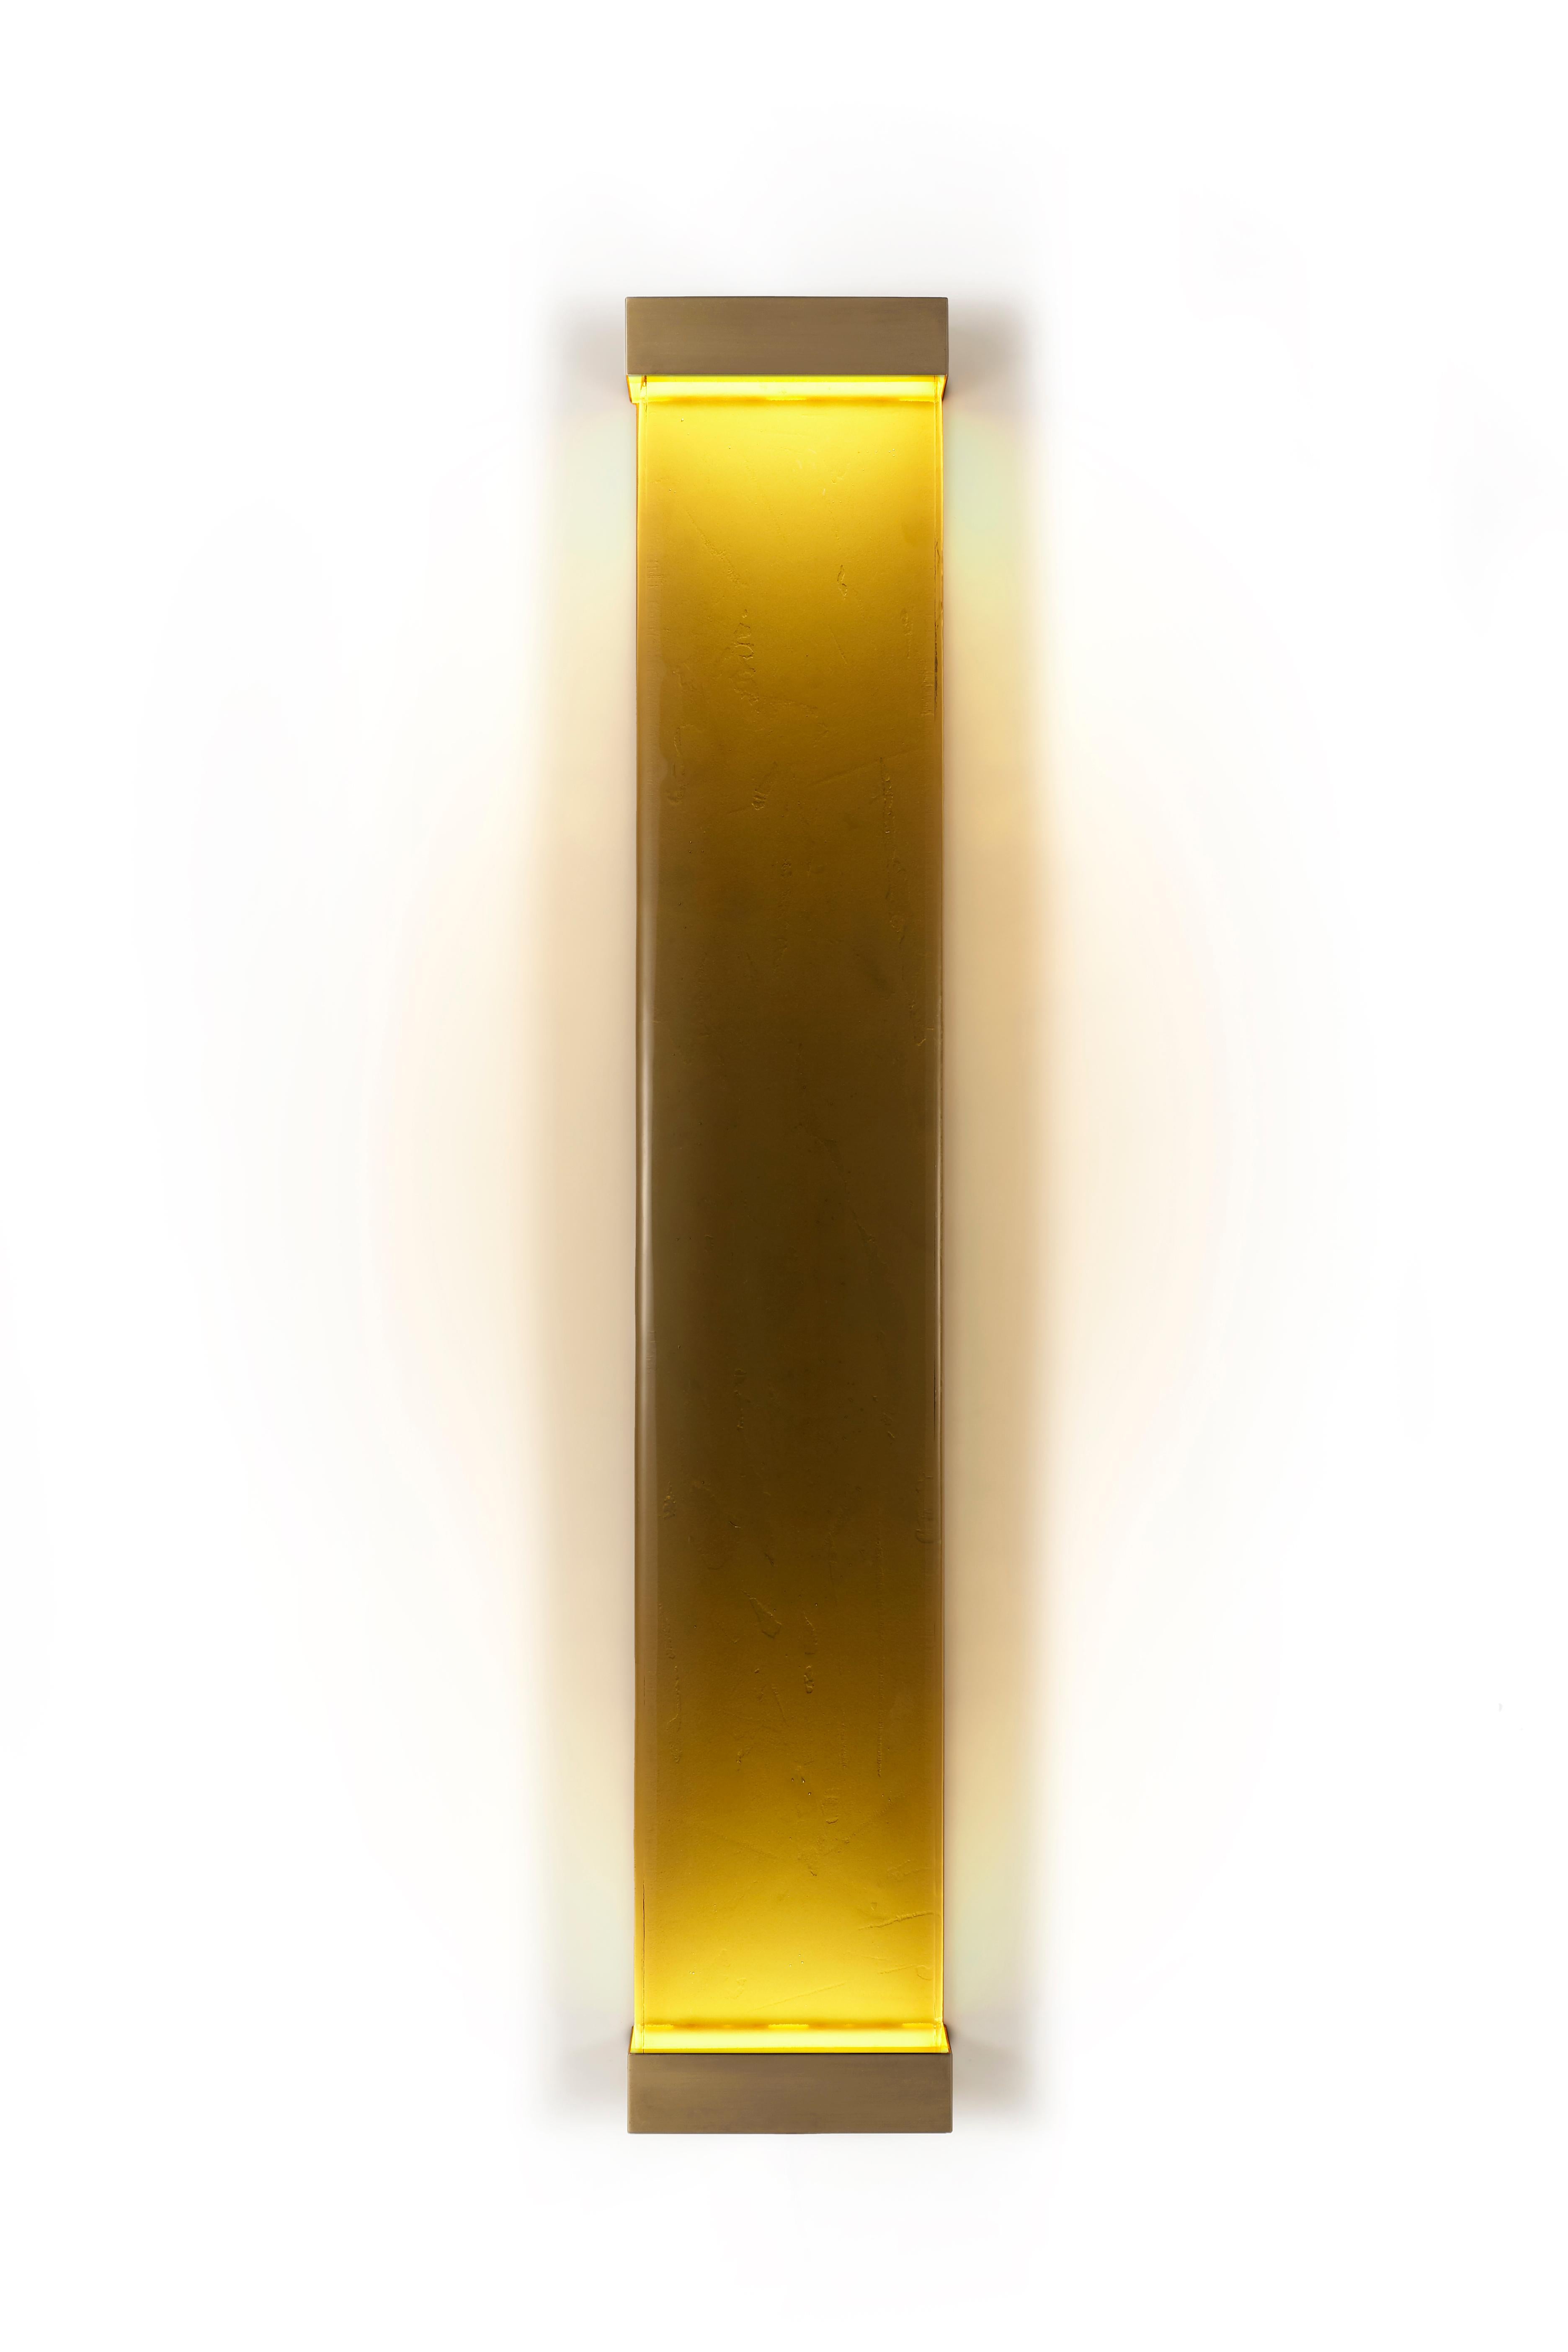 Jud Wall Lamps Ambra by Draga&Aurel Resin, 21st Century Glass Resin Brass